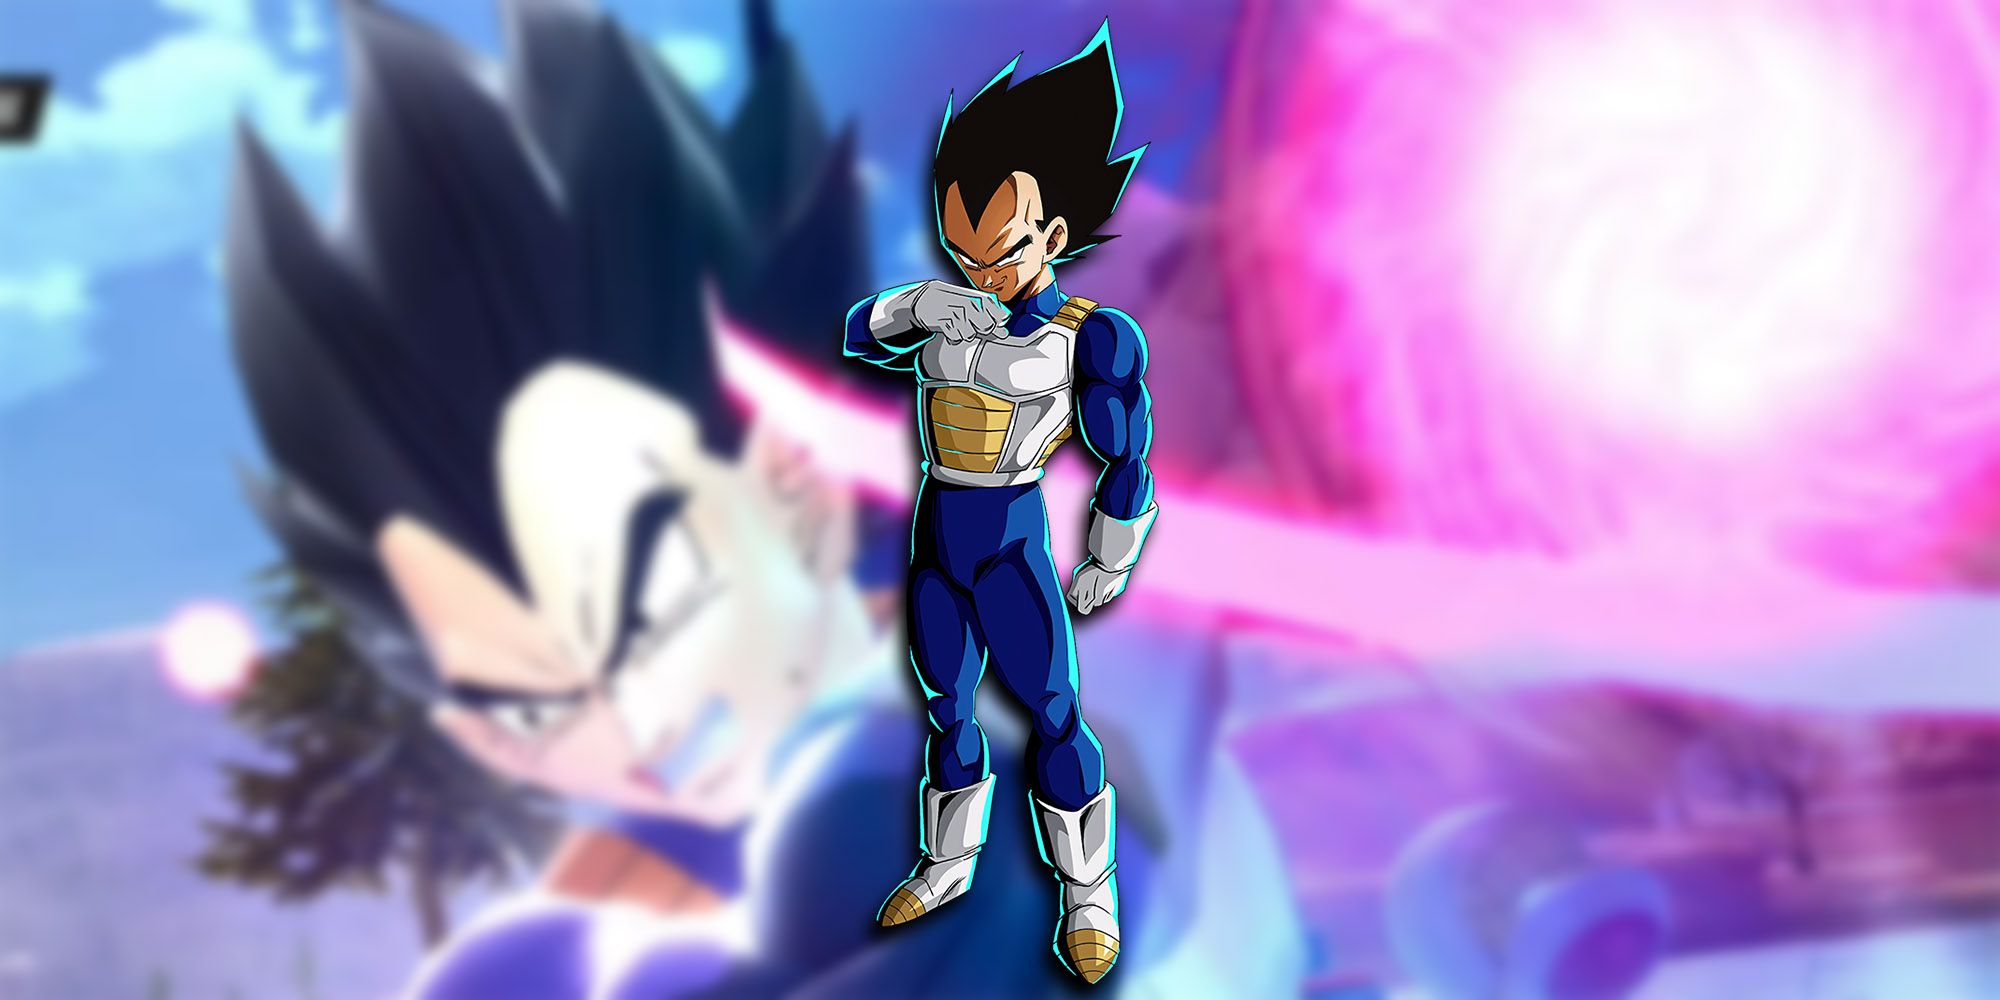 Dragon Ball The Breakers - Vegeta About To Use Galick Gun In-Game With Vegeta PNG Overlaid On Top